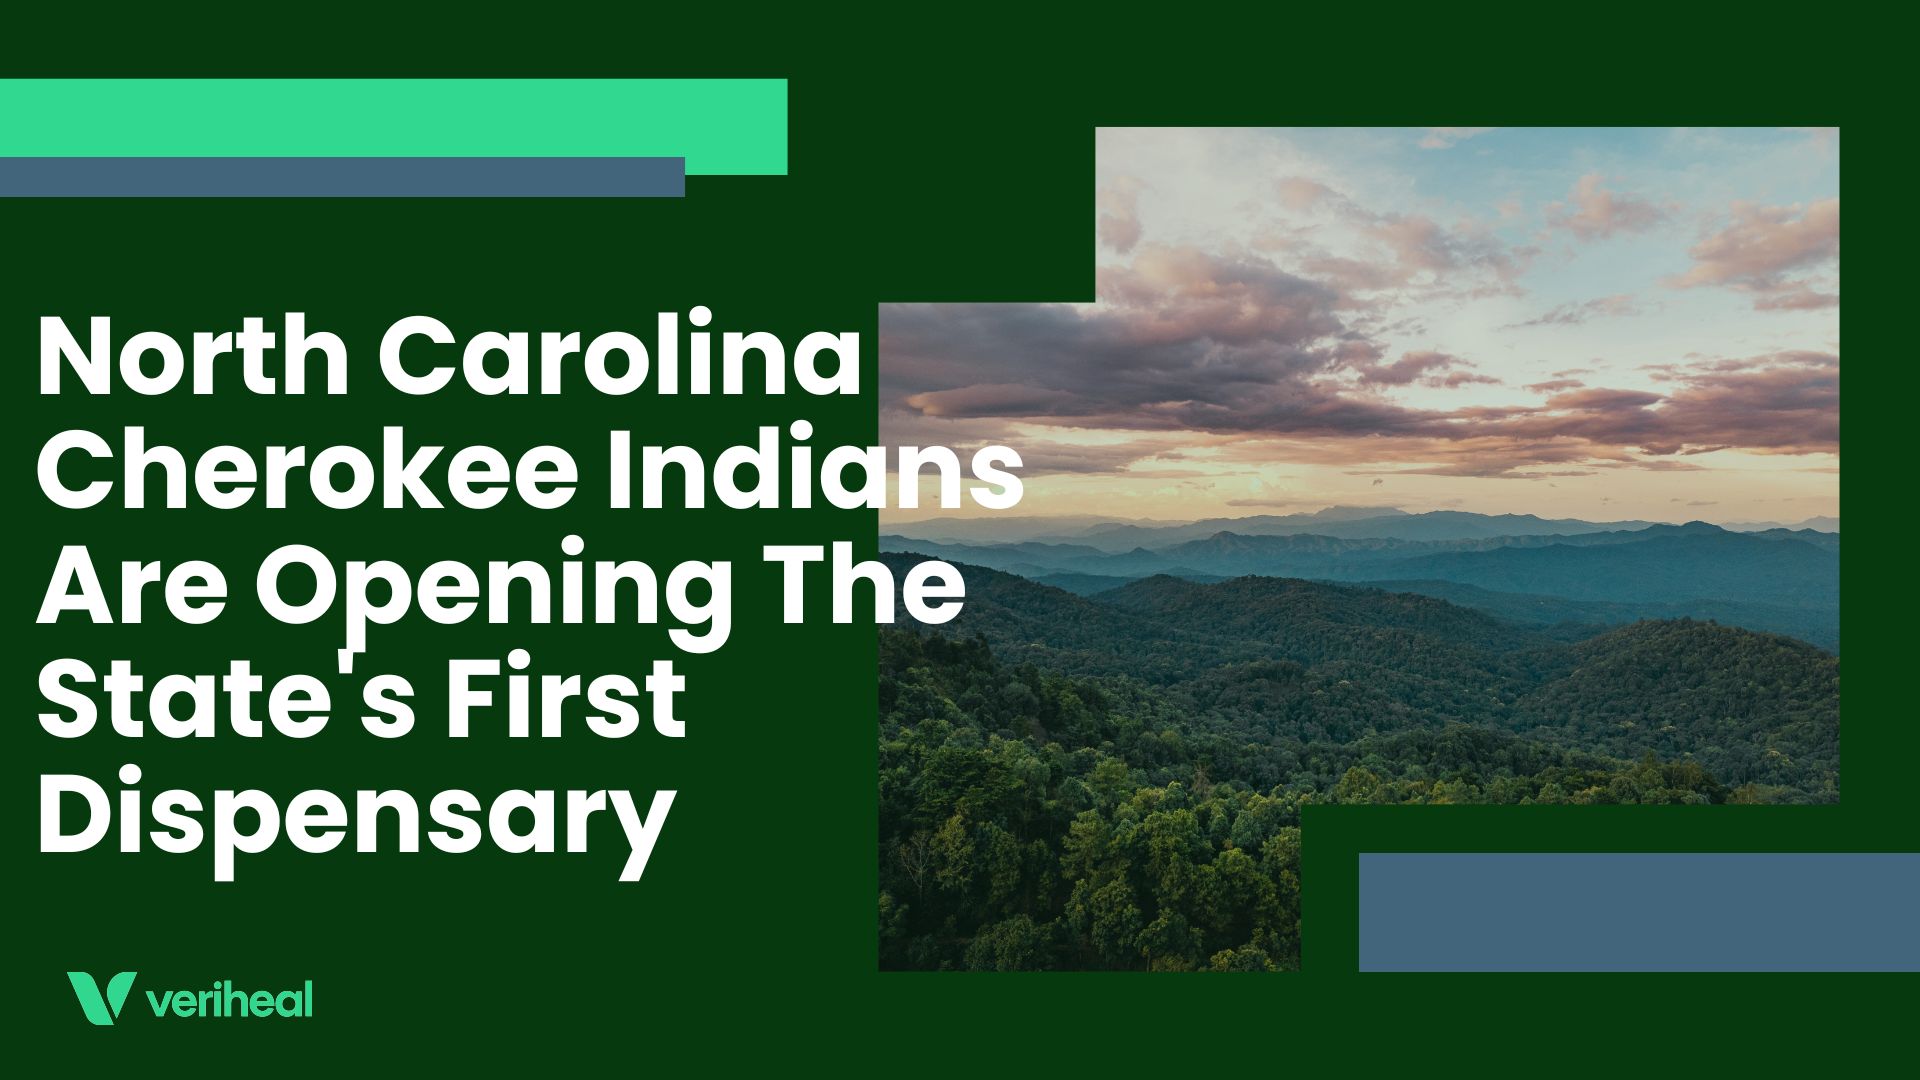 North Carolina Cherokee Indians Are Opening The State's First Dispensary